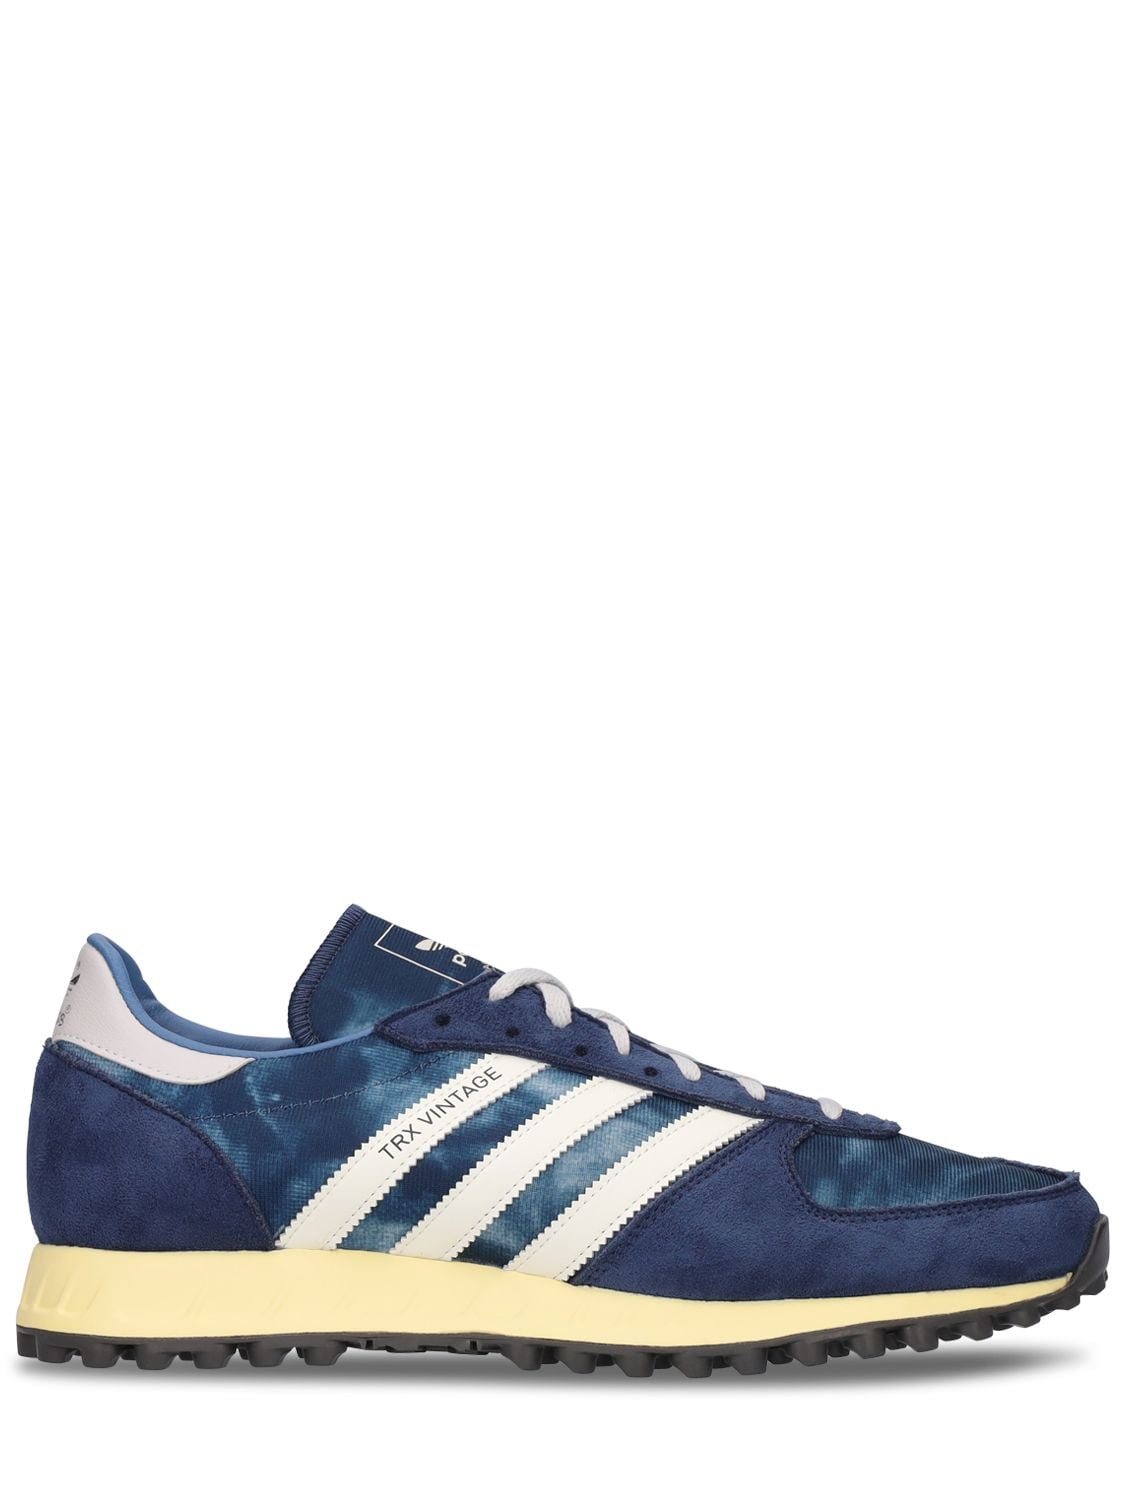 Adidas Originals Trx Vintage Shell, Suede And Leather Sneakers In Blue